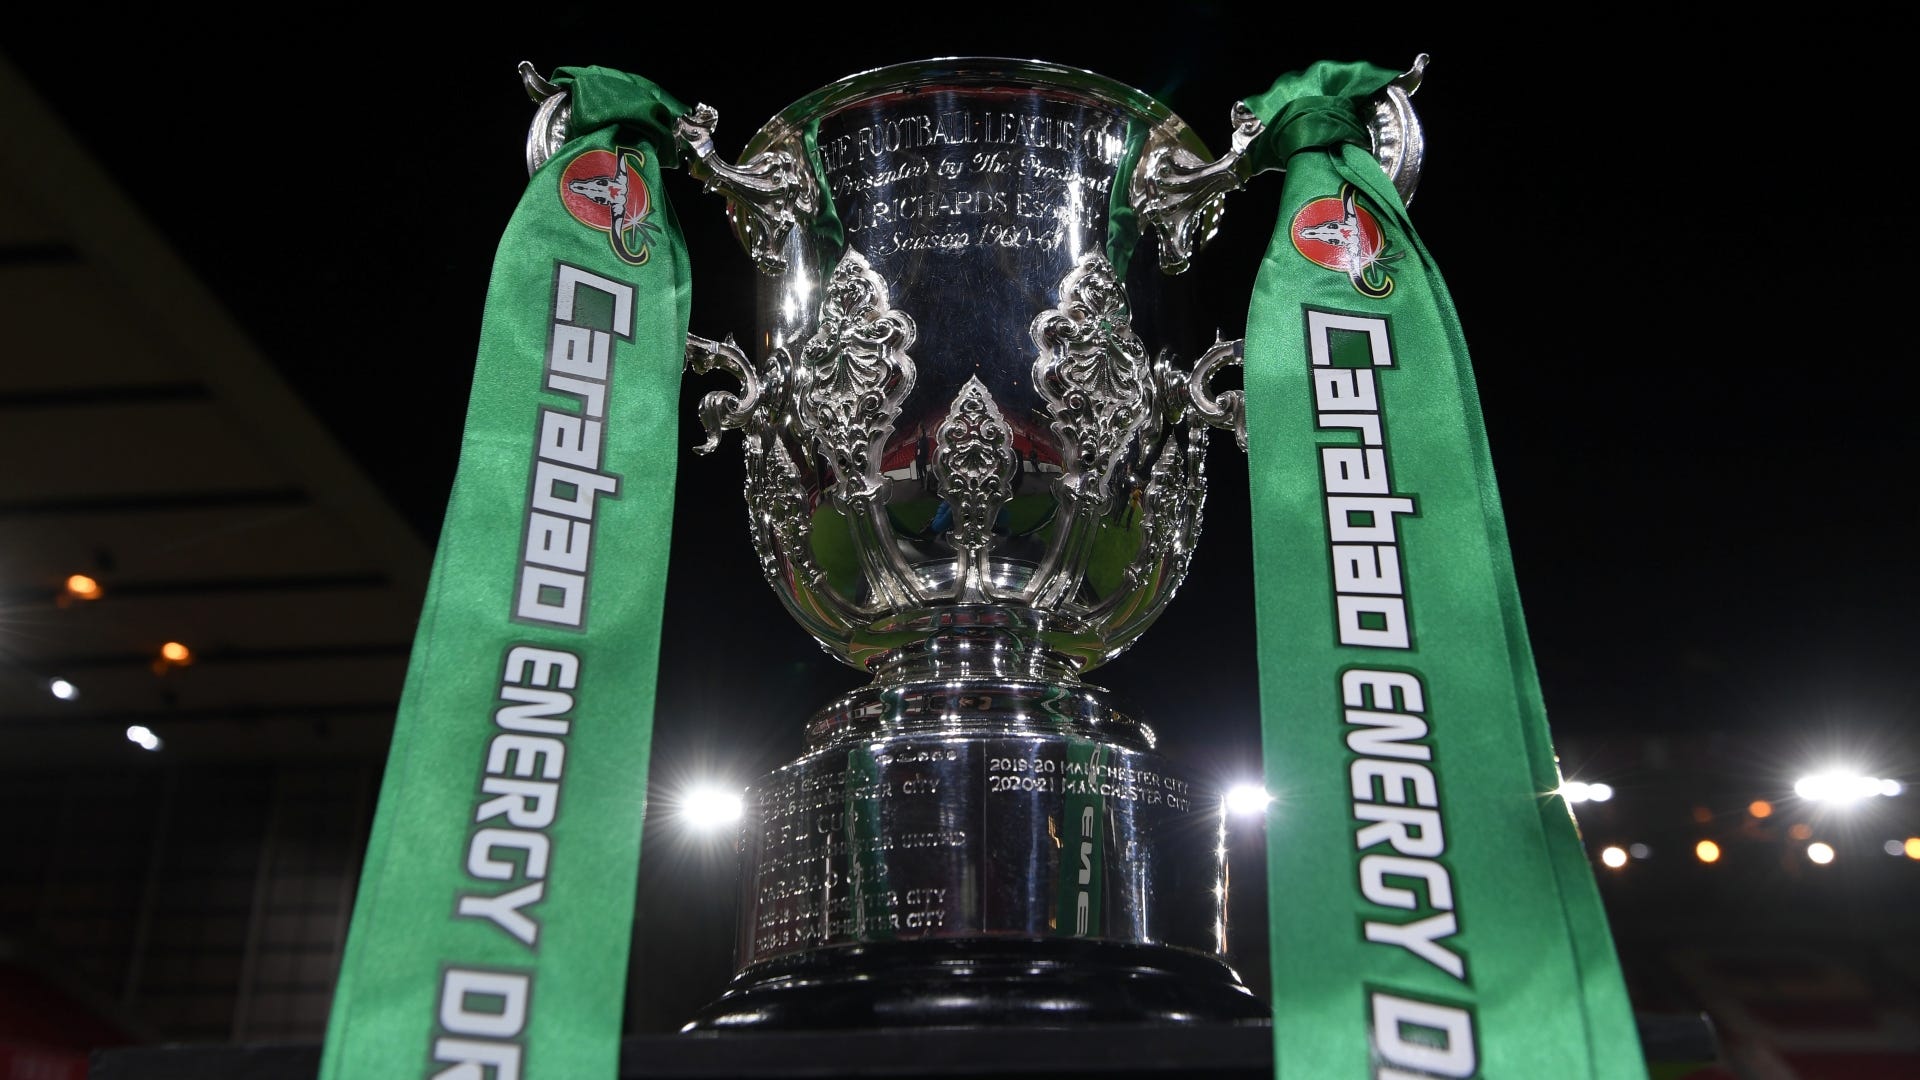 carabao cup final where to watch